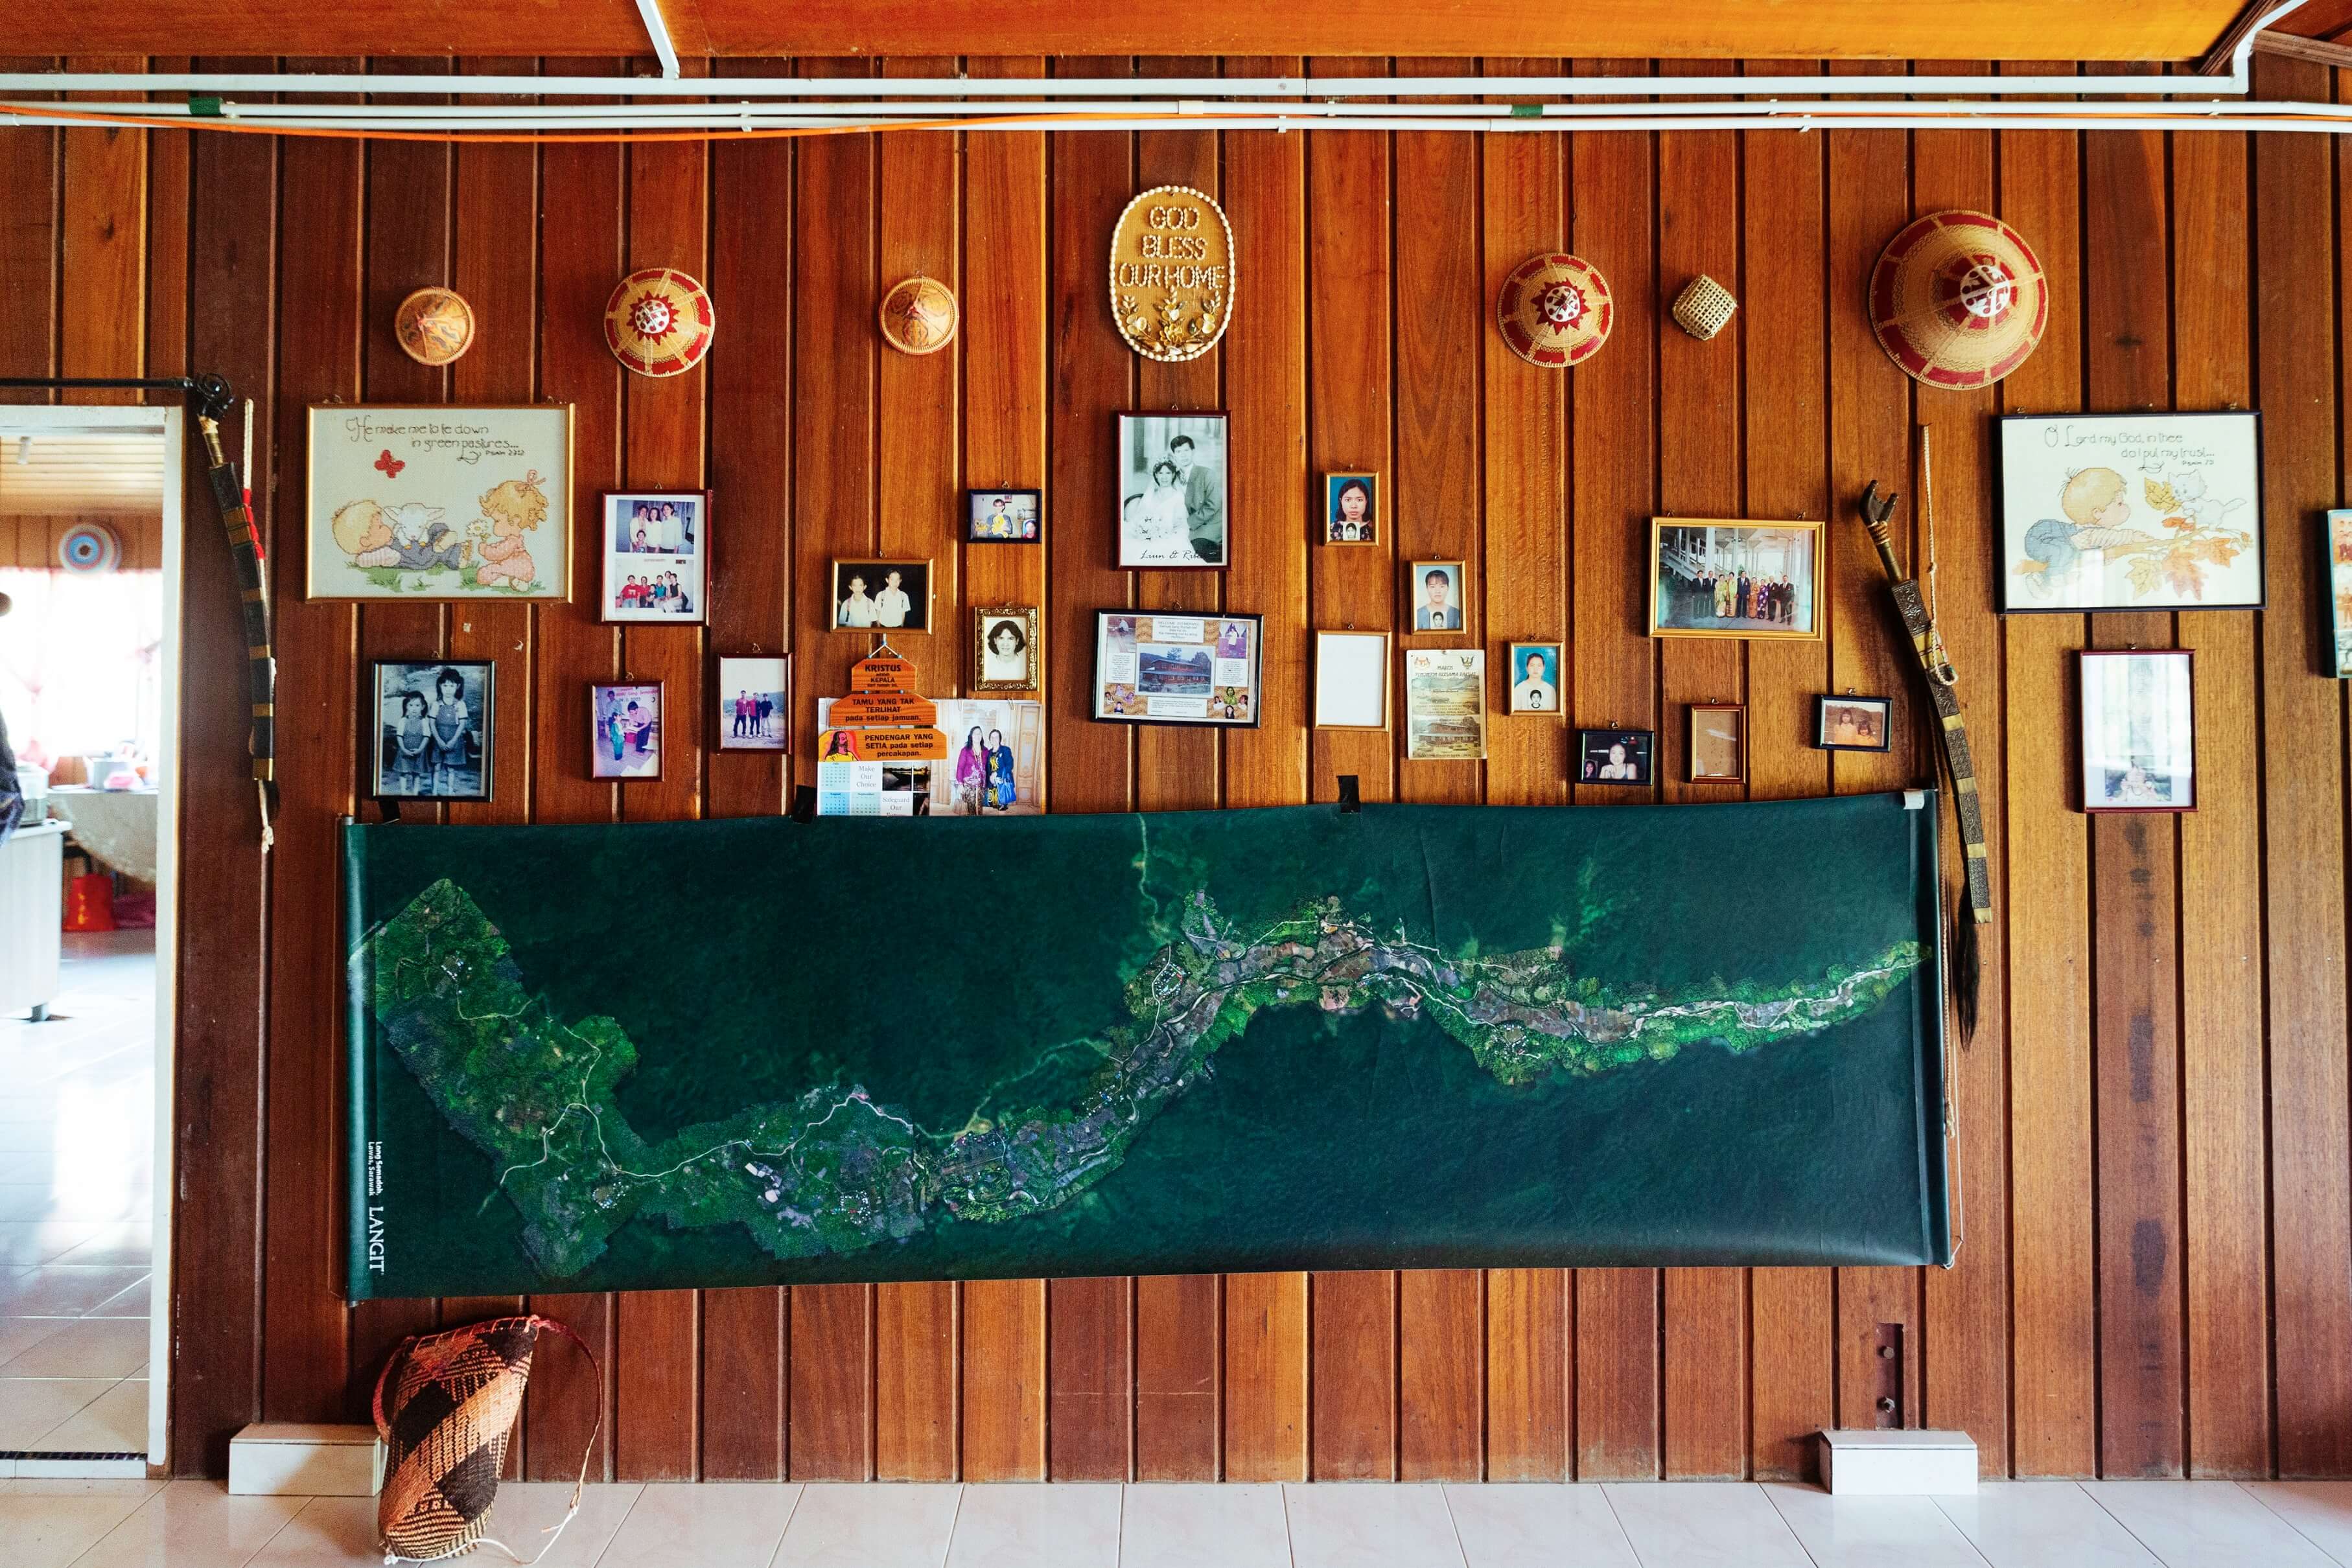 A map of Long Semadoh, displayed with personal photographs and artifacts reflecting local culture. Langit has found success in bringing the Lun Bawang farmers’ rice to a bigger market. Through travel, they hope to bridge the rural-urban divide.